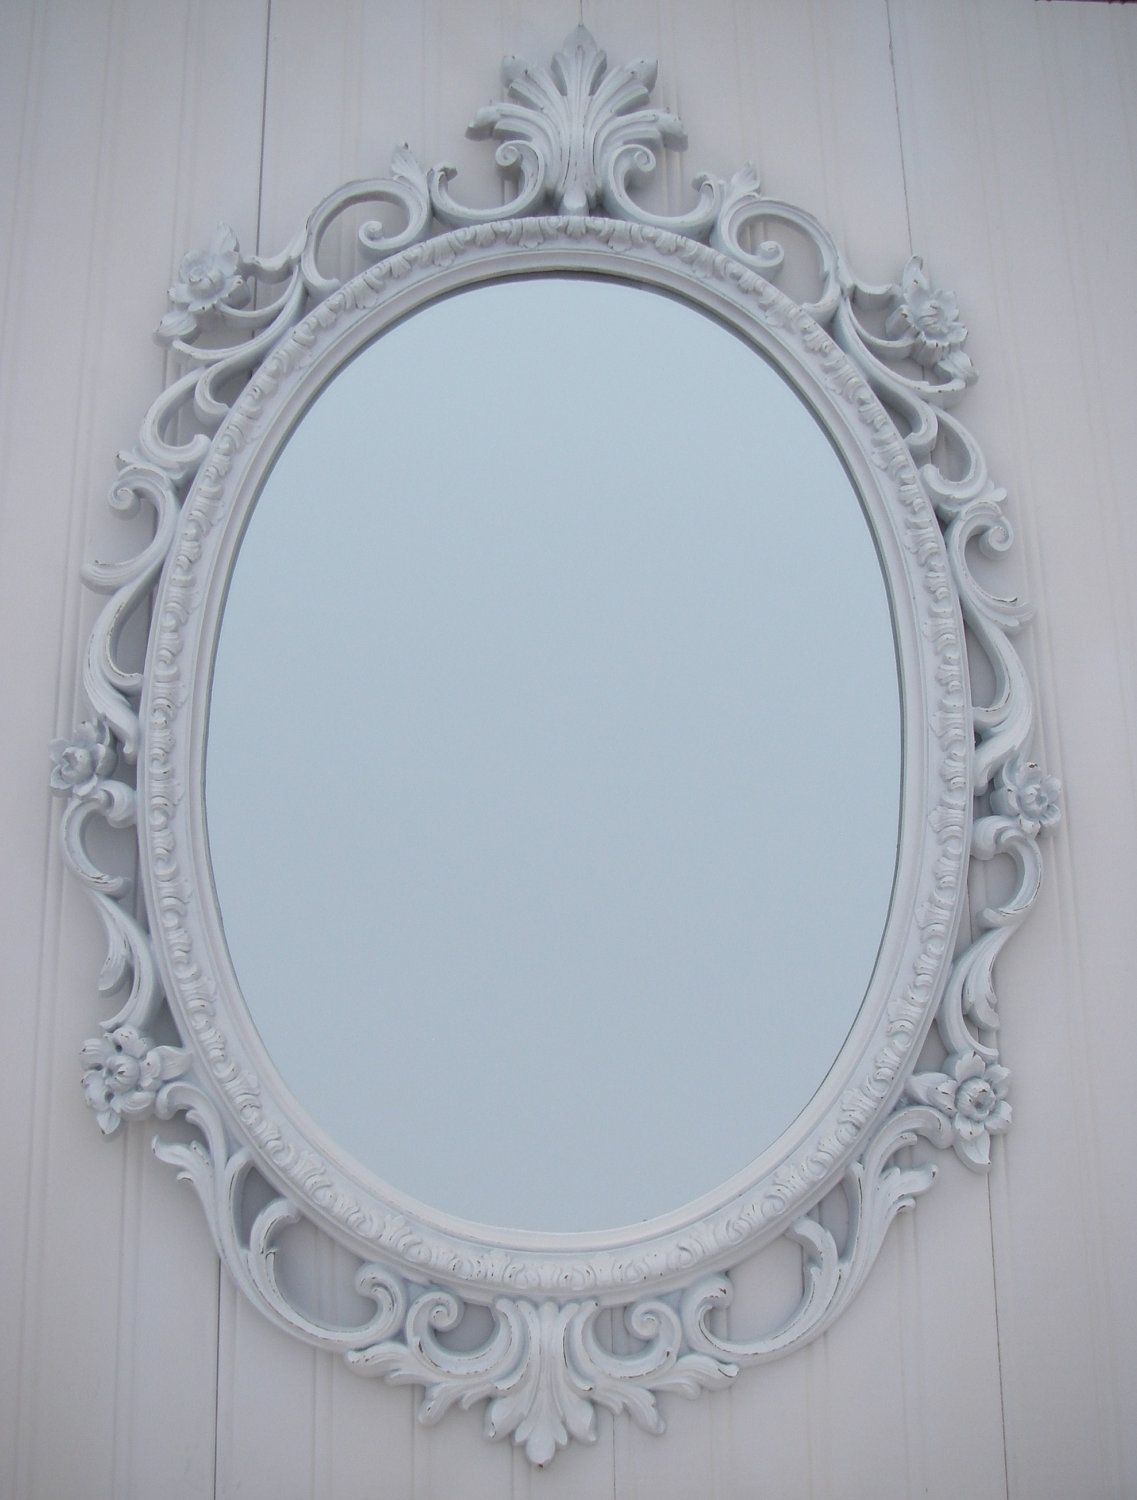 Vintage White Mirror Frame Homco Oval Shab French Country Within White Antique Mirror (View 11 of 15)